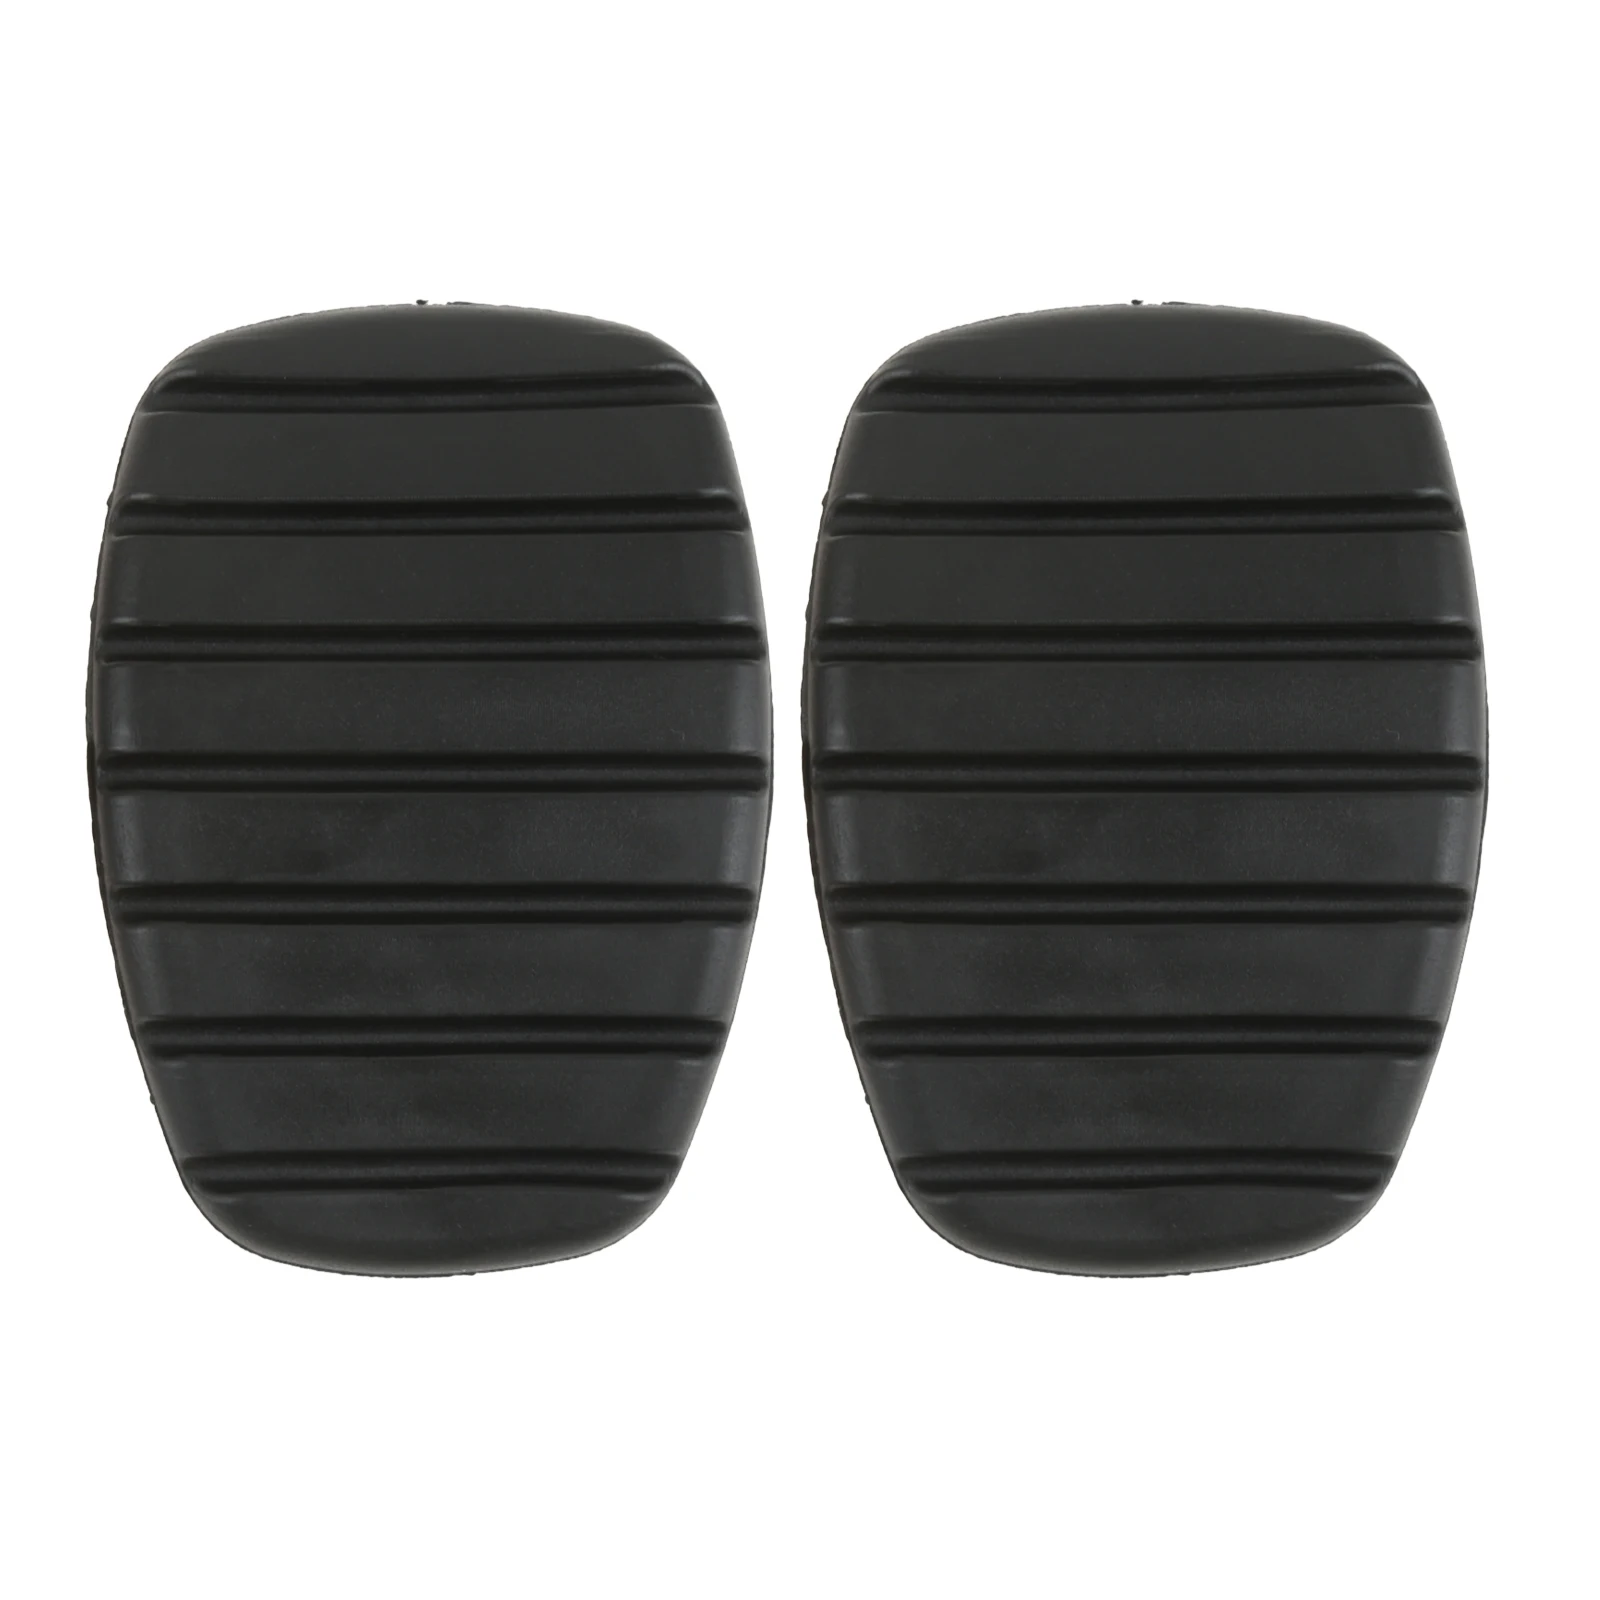 Cs car brake clutch foot pedal pad part cover 8200183752 for renault scenic 2 2003 2010 thumb200